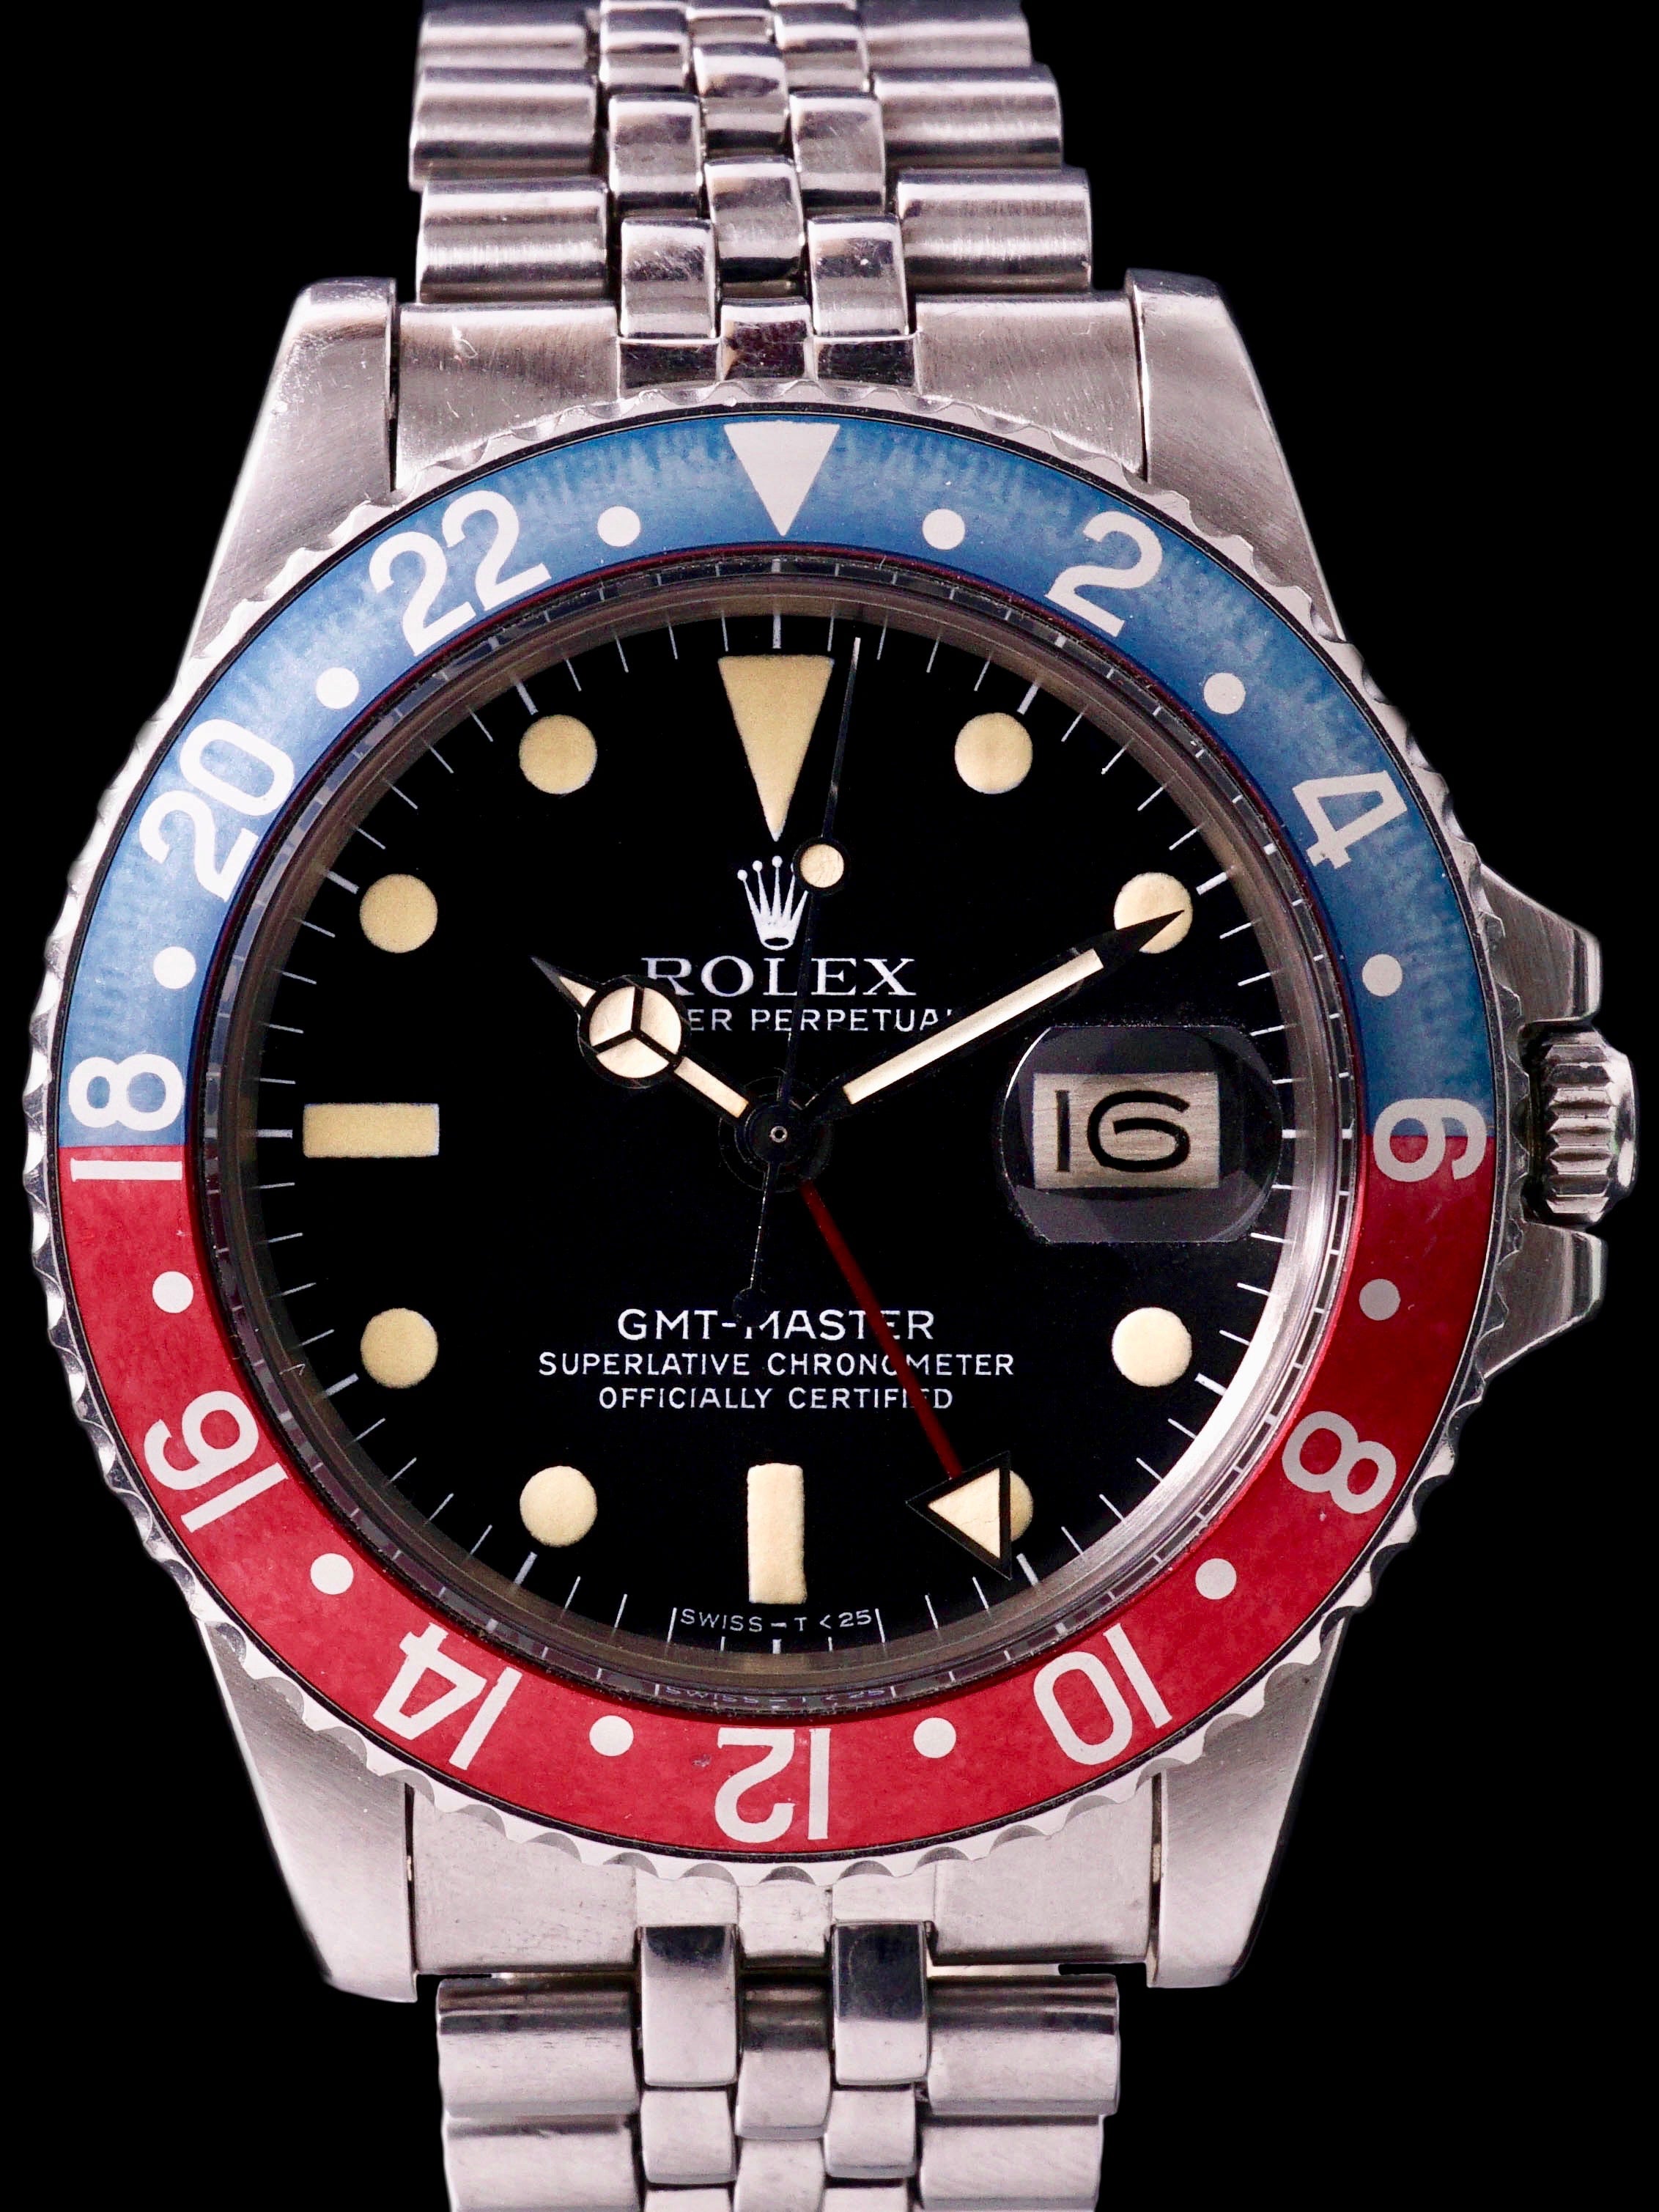 1978 Rolex GMT-Master (Ref. 1675) Mk. IV W/ Box and Papers